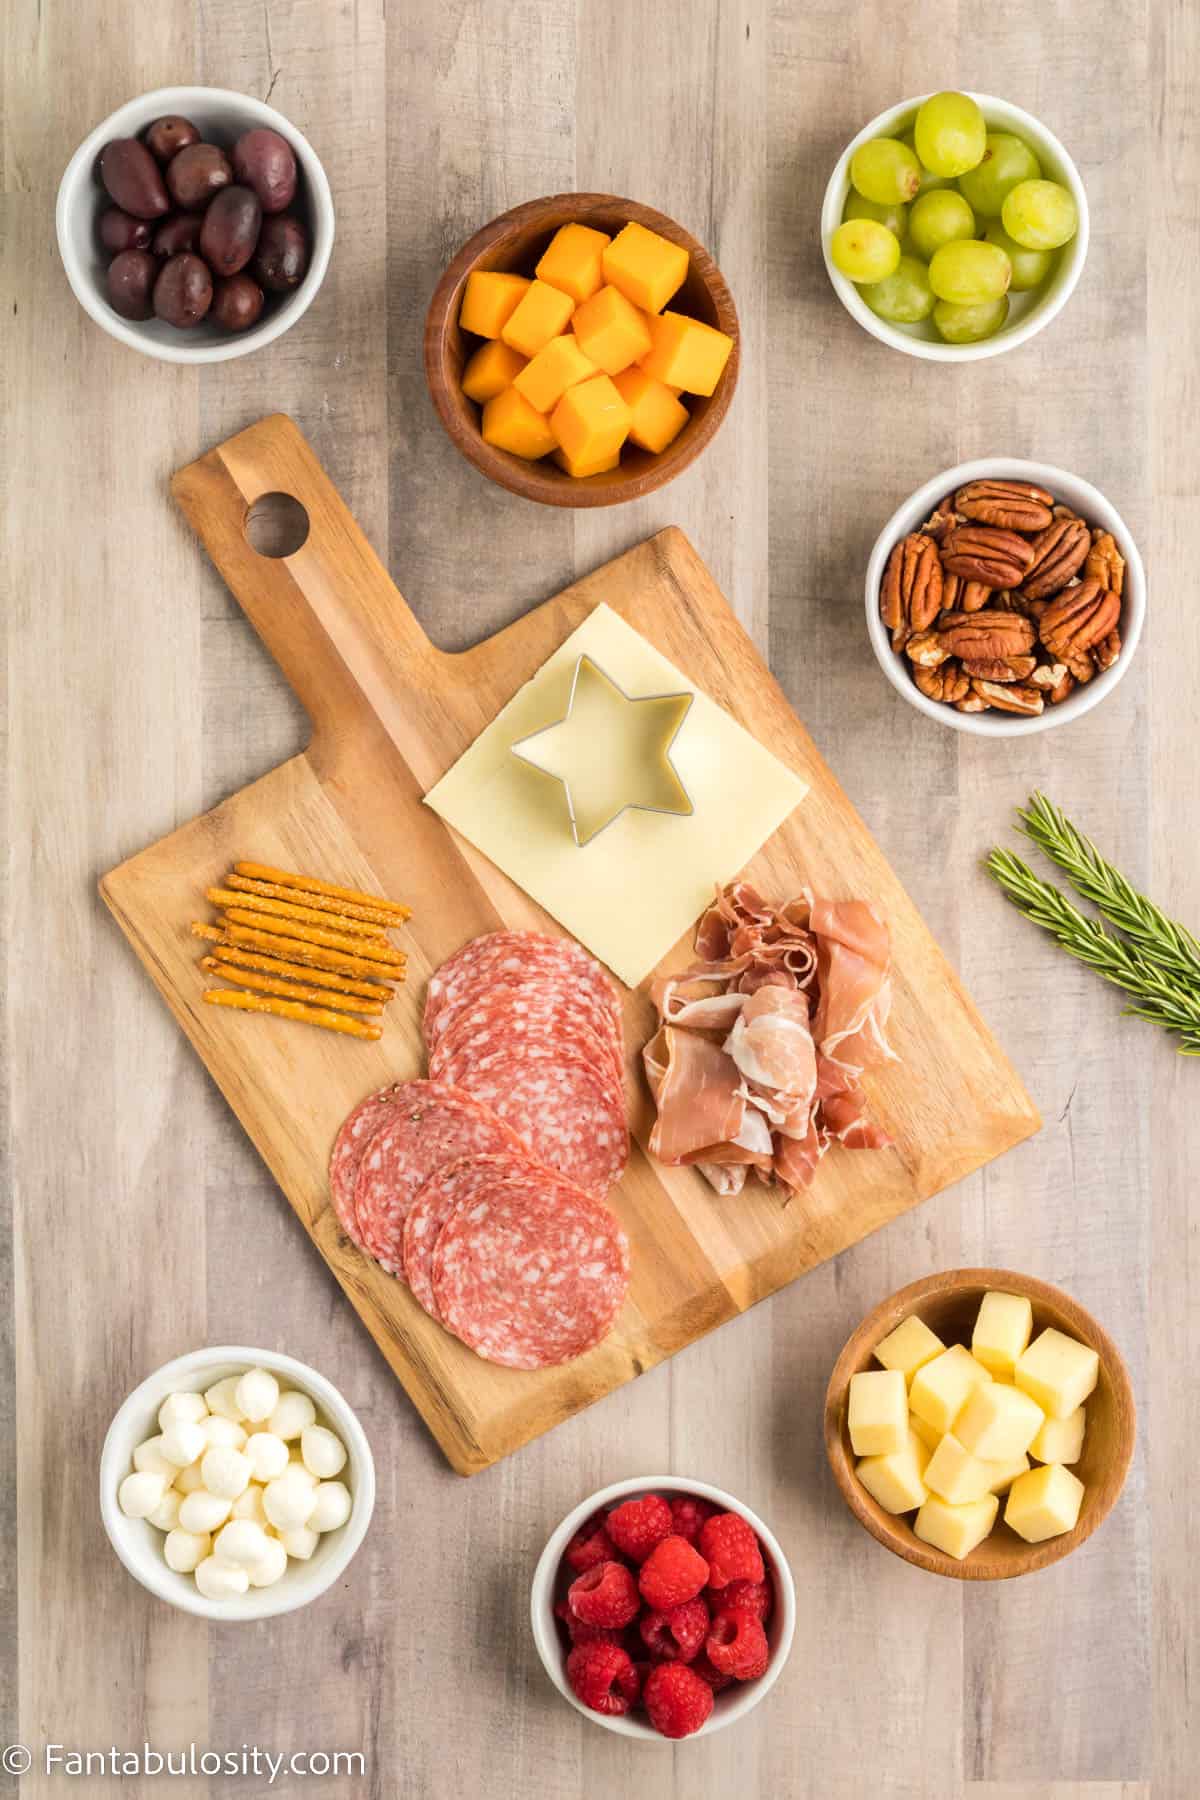 Bowls fruit, cheese and nuts and a wooden board holding different types of meat are displayed